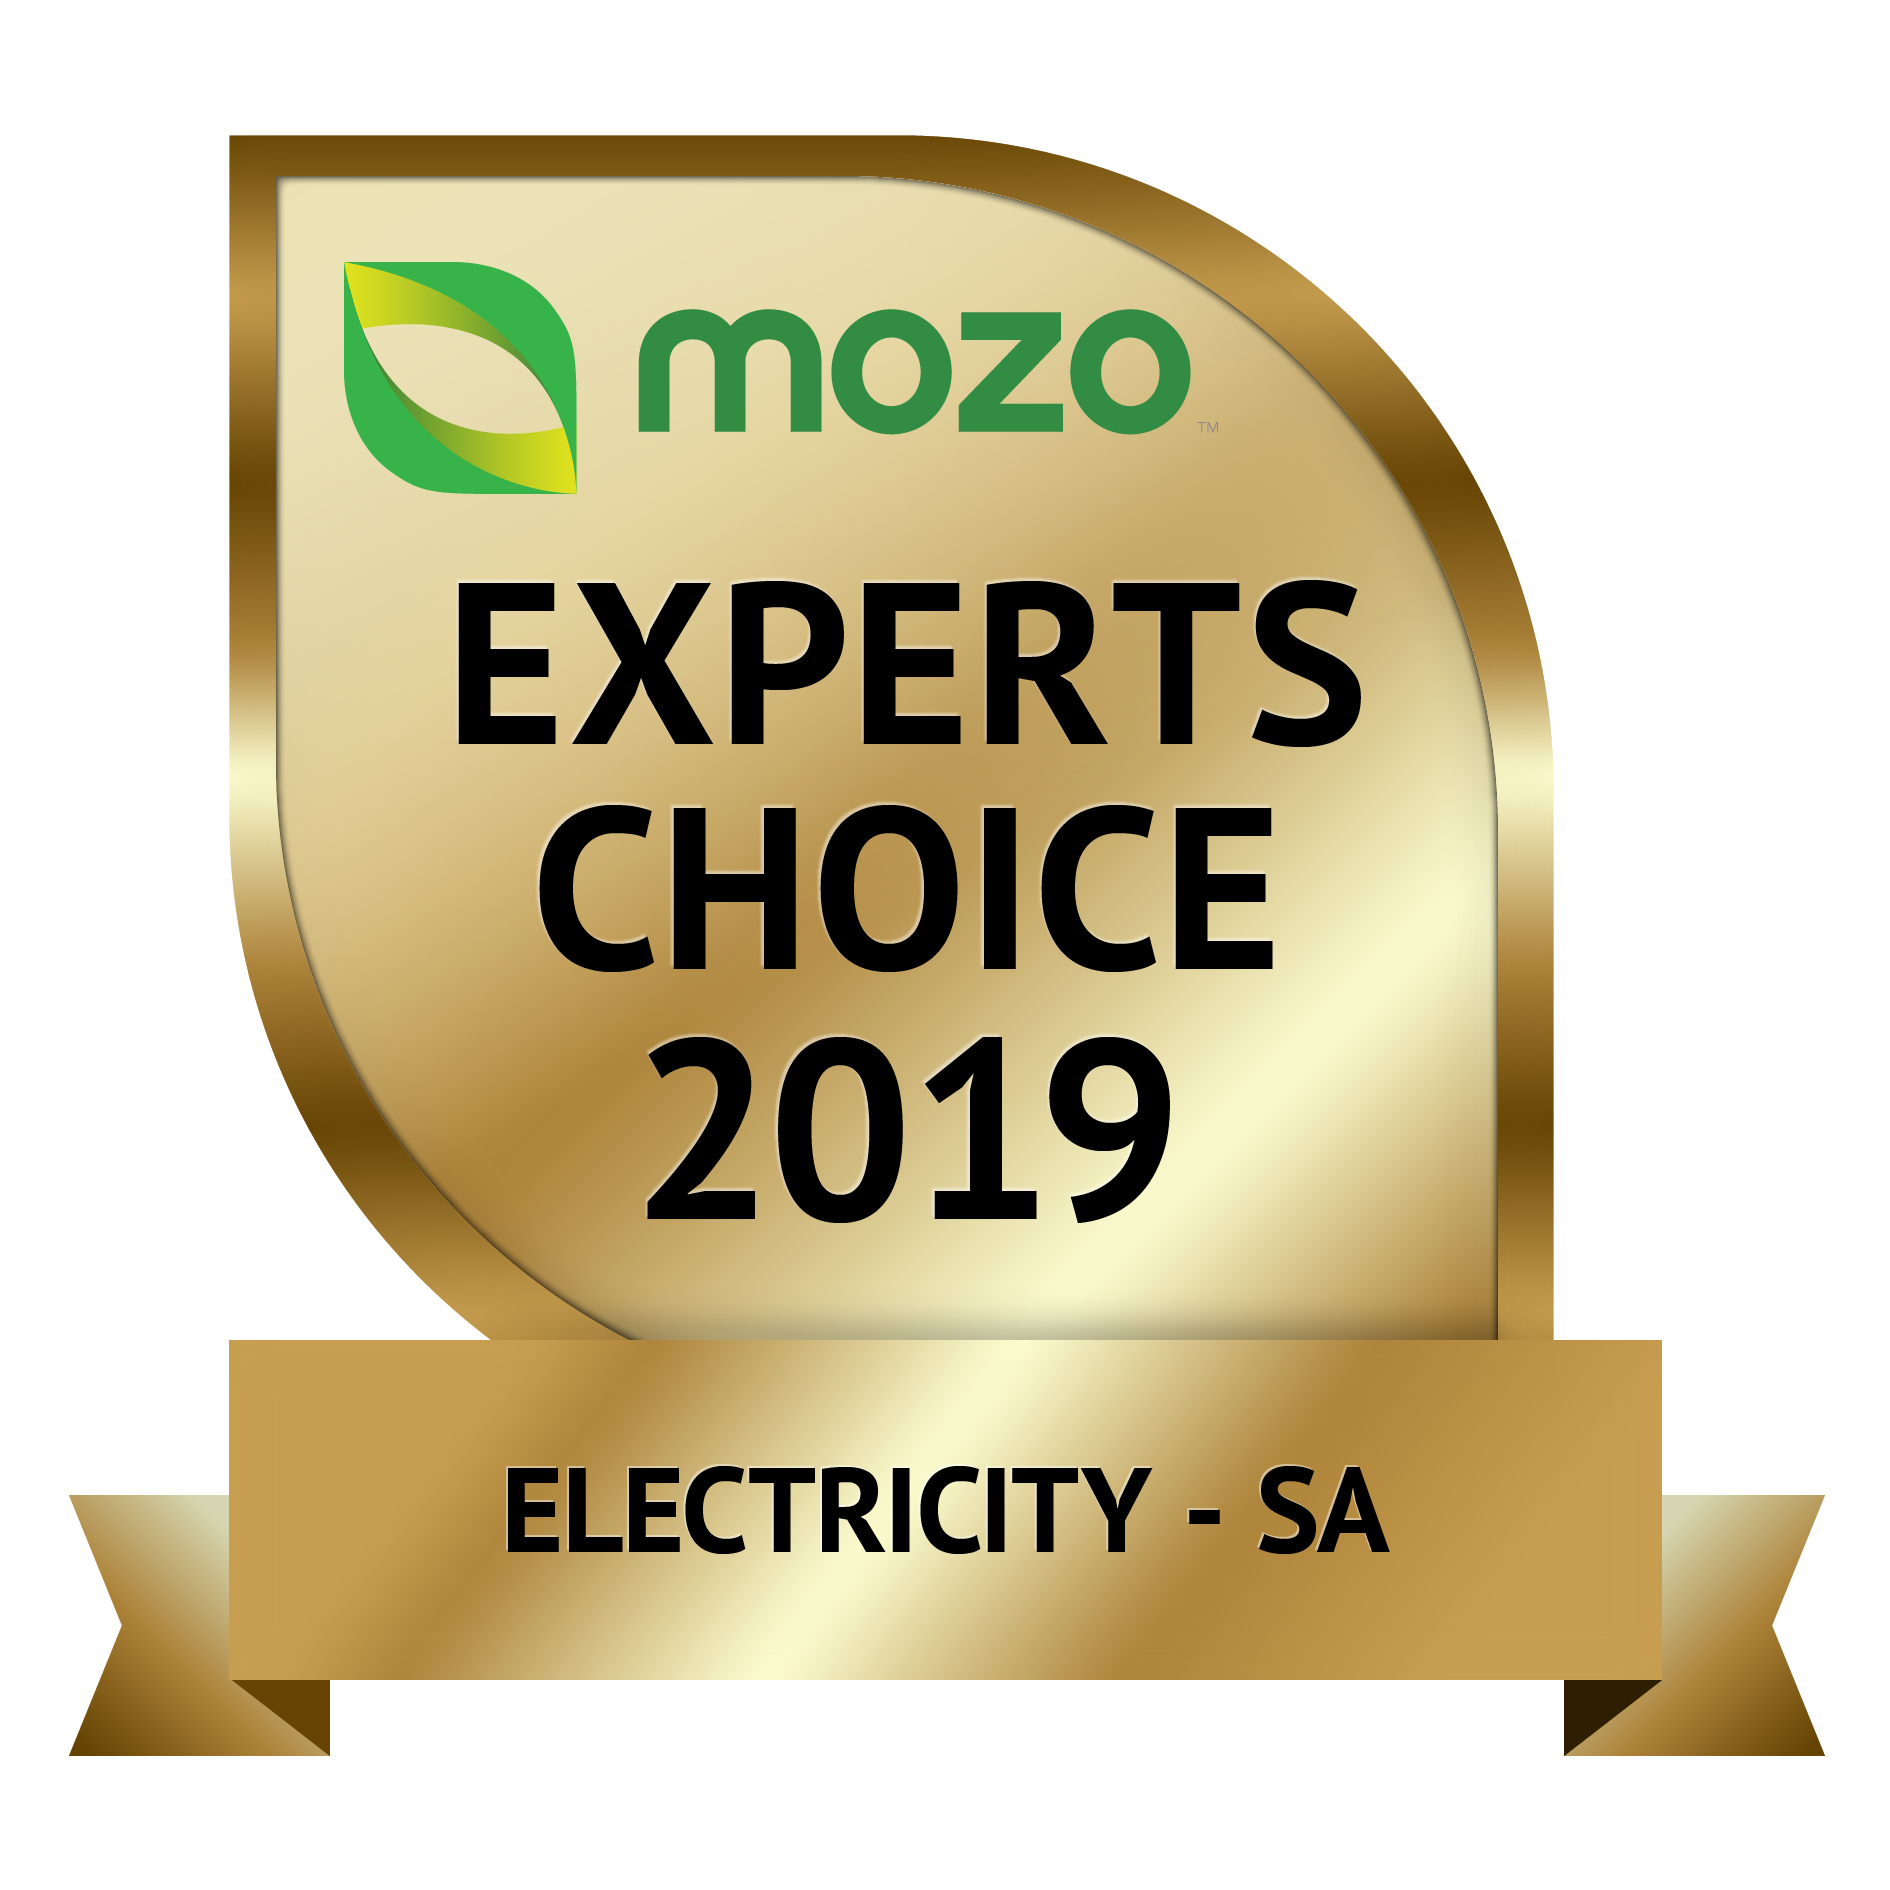 Mozo Experts Choice 2019;